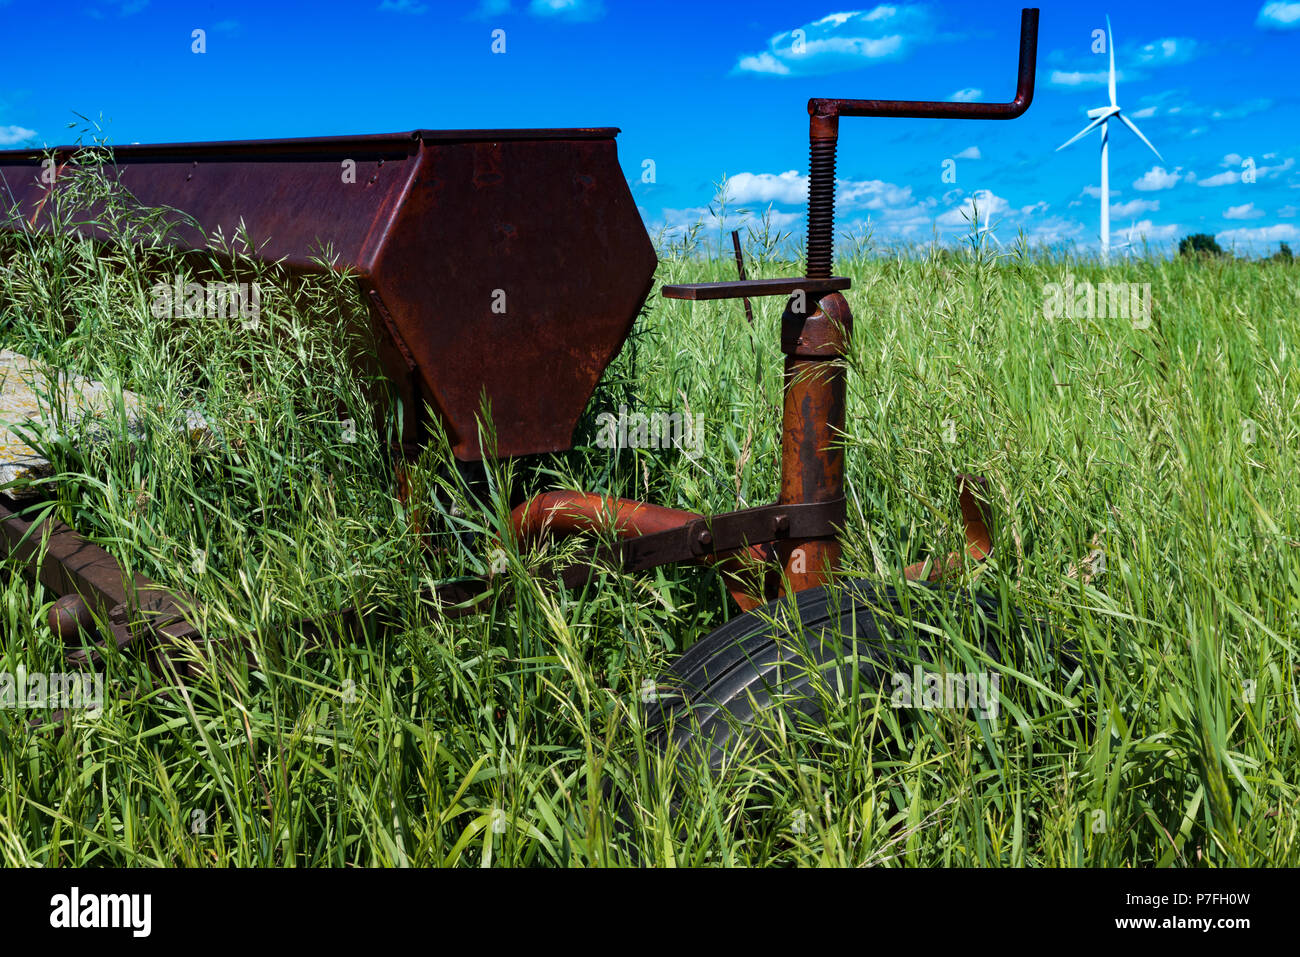 Vintage farming disc harrow in a field surrounded by tall grass with wind turbines outside of Swift Current, Saskatchewan, Canada Stock Photo